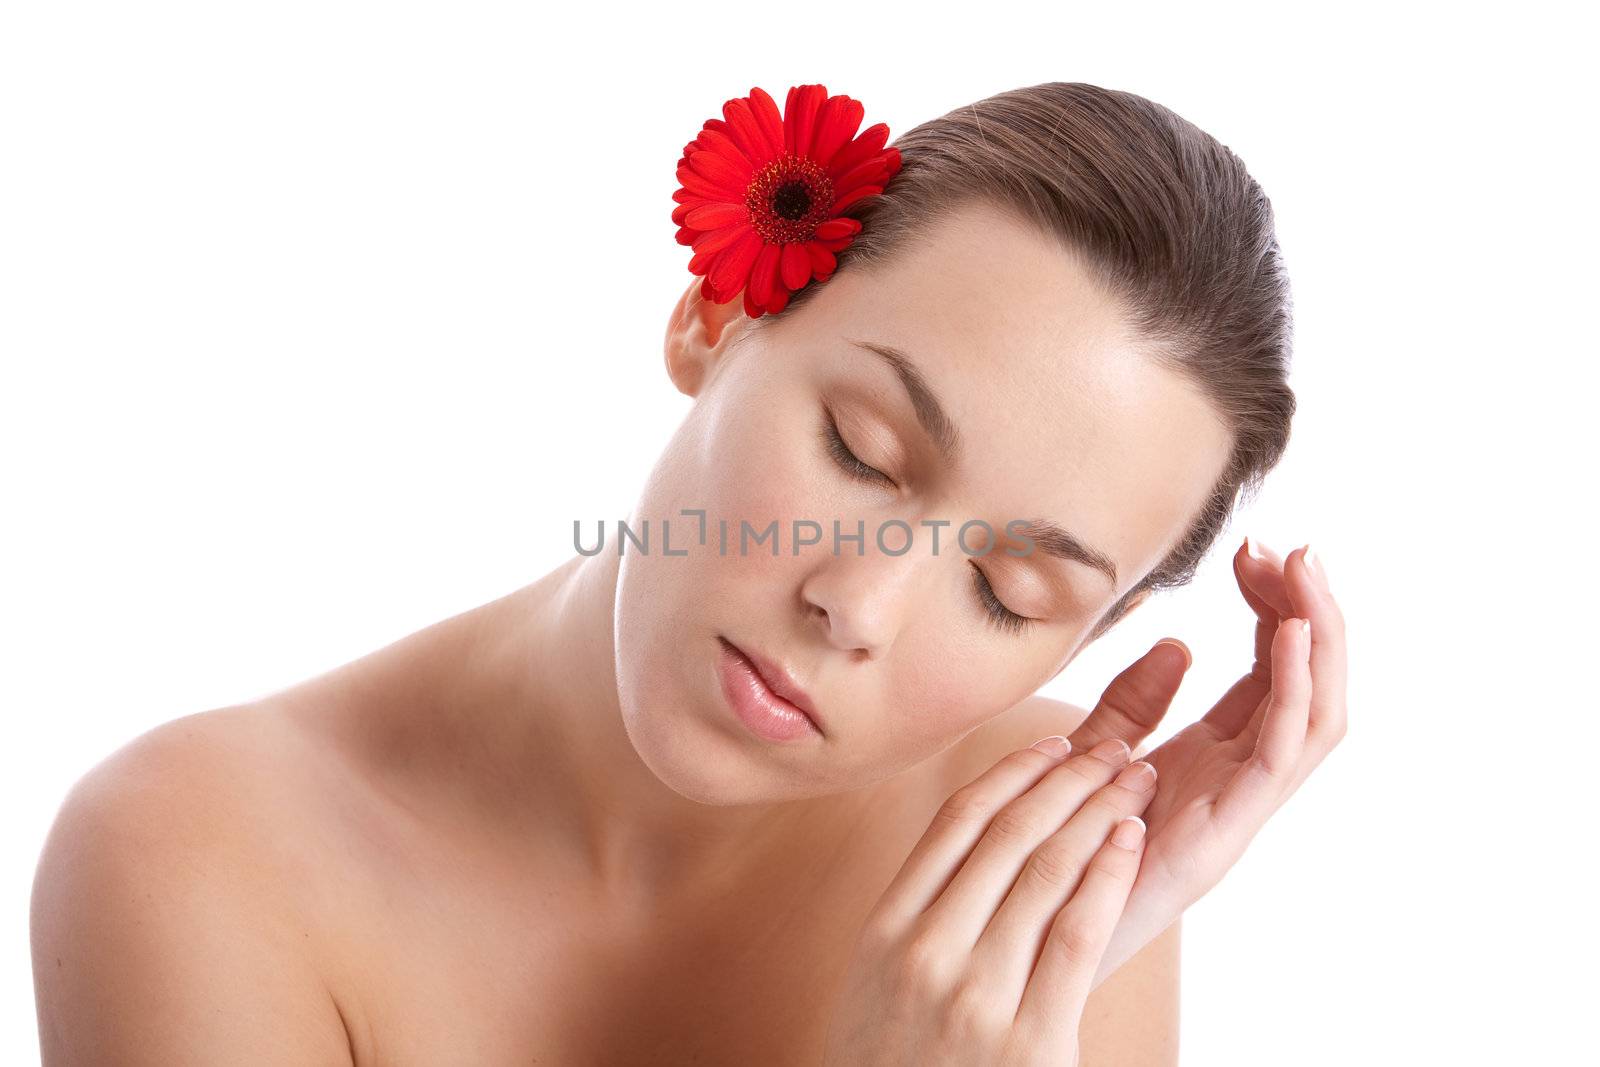 Beautiful woman with red flower behind her ear